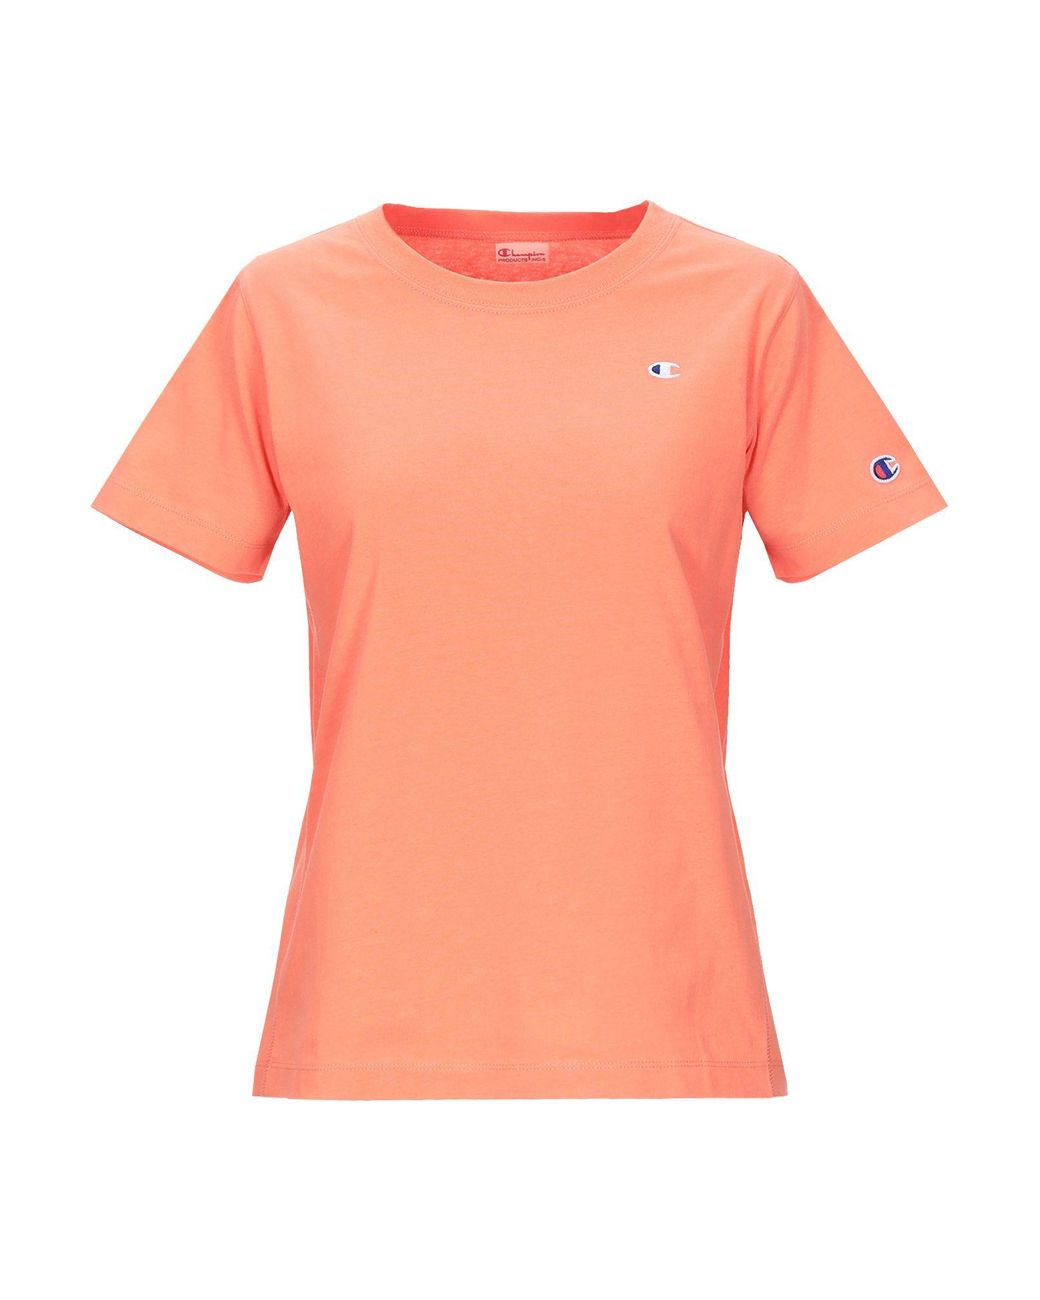 Champion T-shirt in Pink